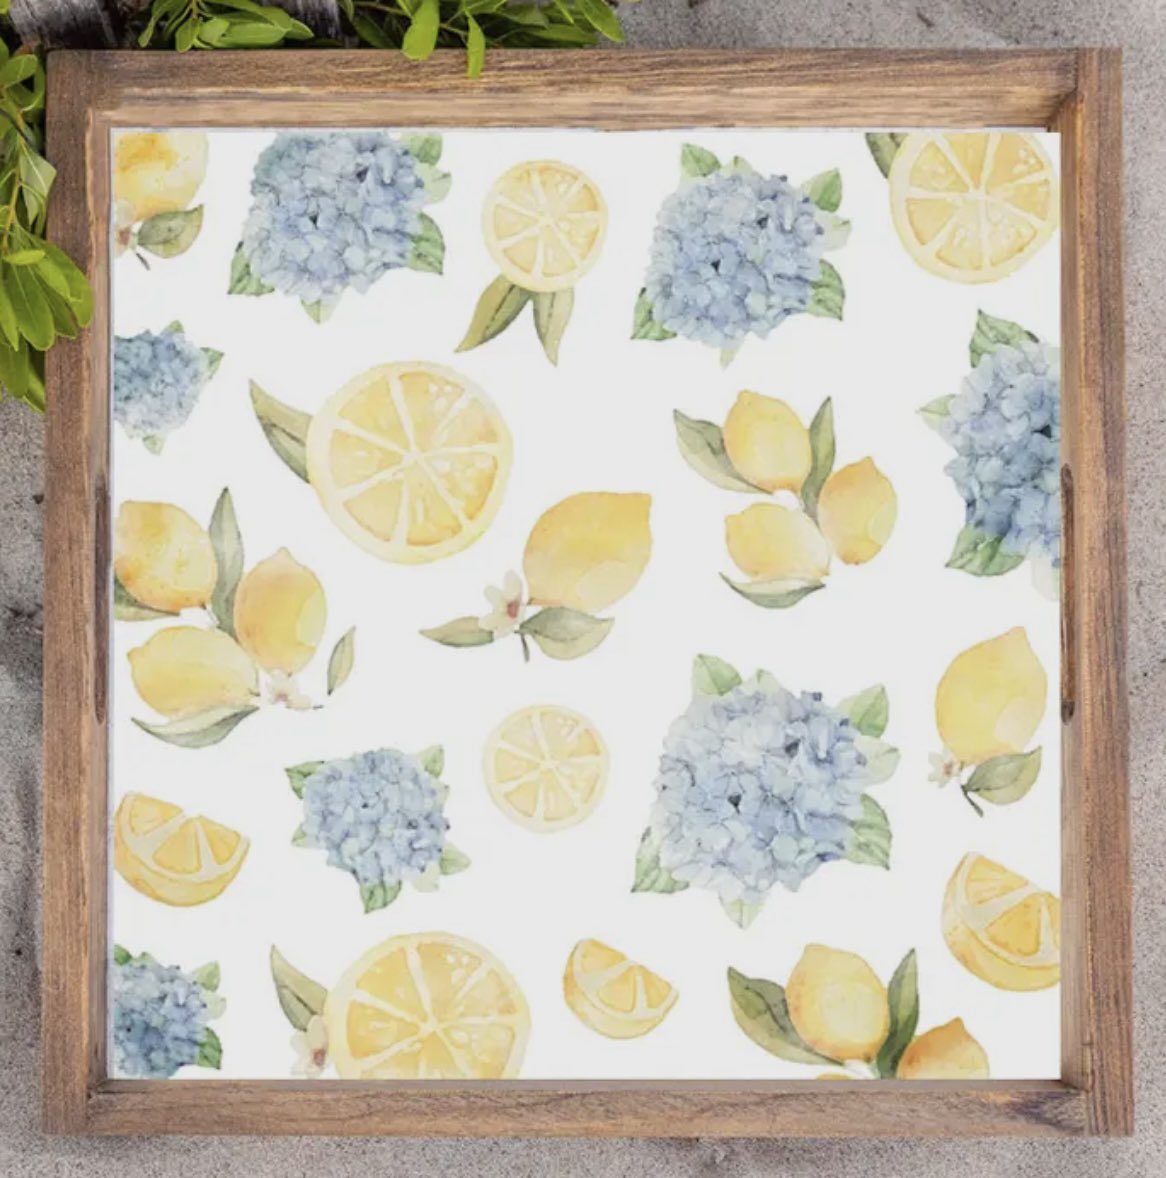 Two of my favorites lemons & hydrangeas 🍋 Isn’t this tray beautiful?!? Made in the USA 🇺🇸   #GiftGivingSimplified #Gifts #GiftShop #ShopLocal #CaldwellNJ 🇺🇸 #SmithCoGifts 💙